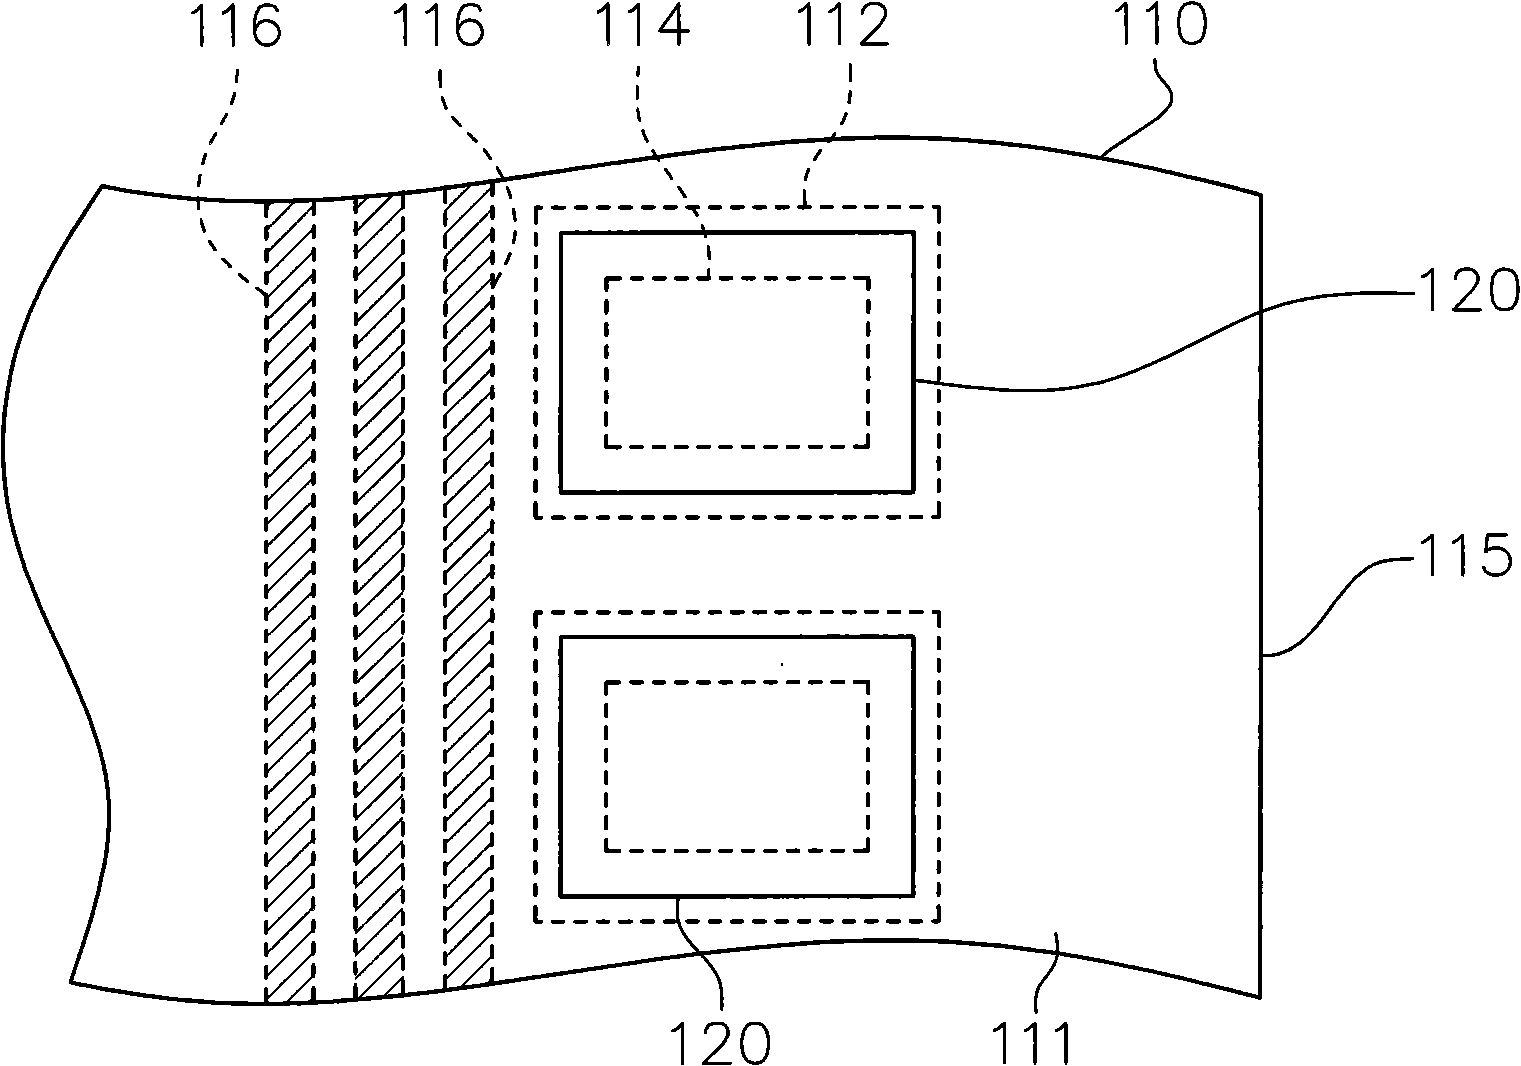 Wafer structure possessing finger-like projection connected with multi-window